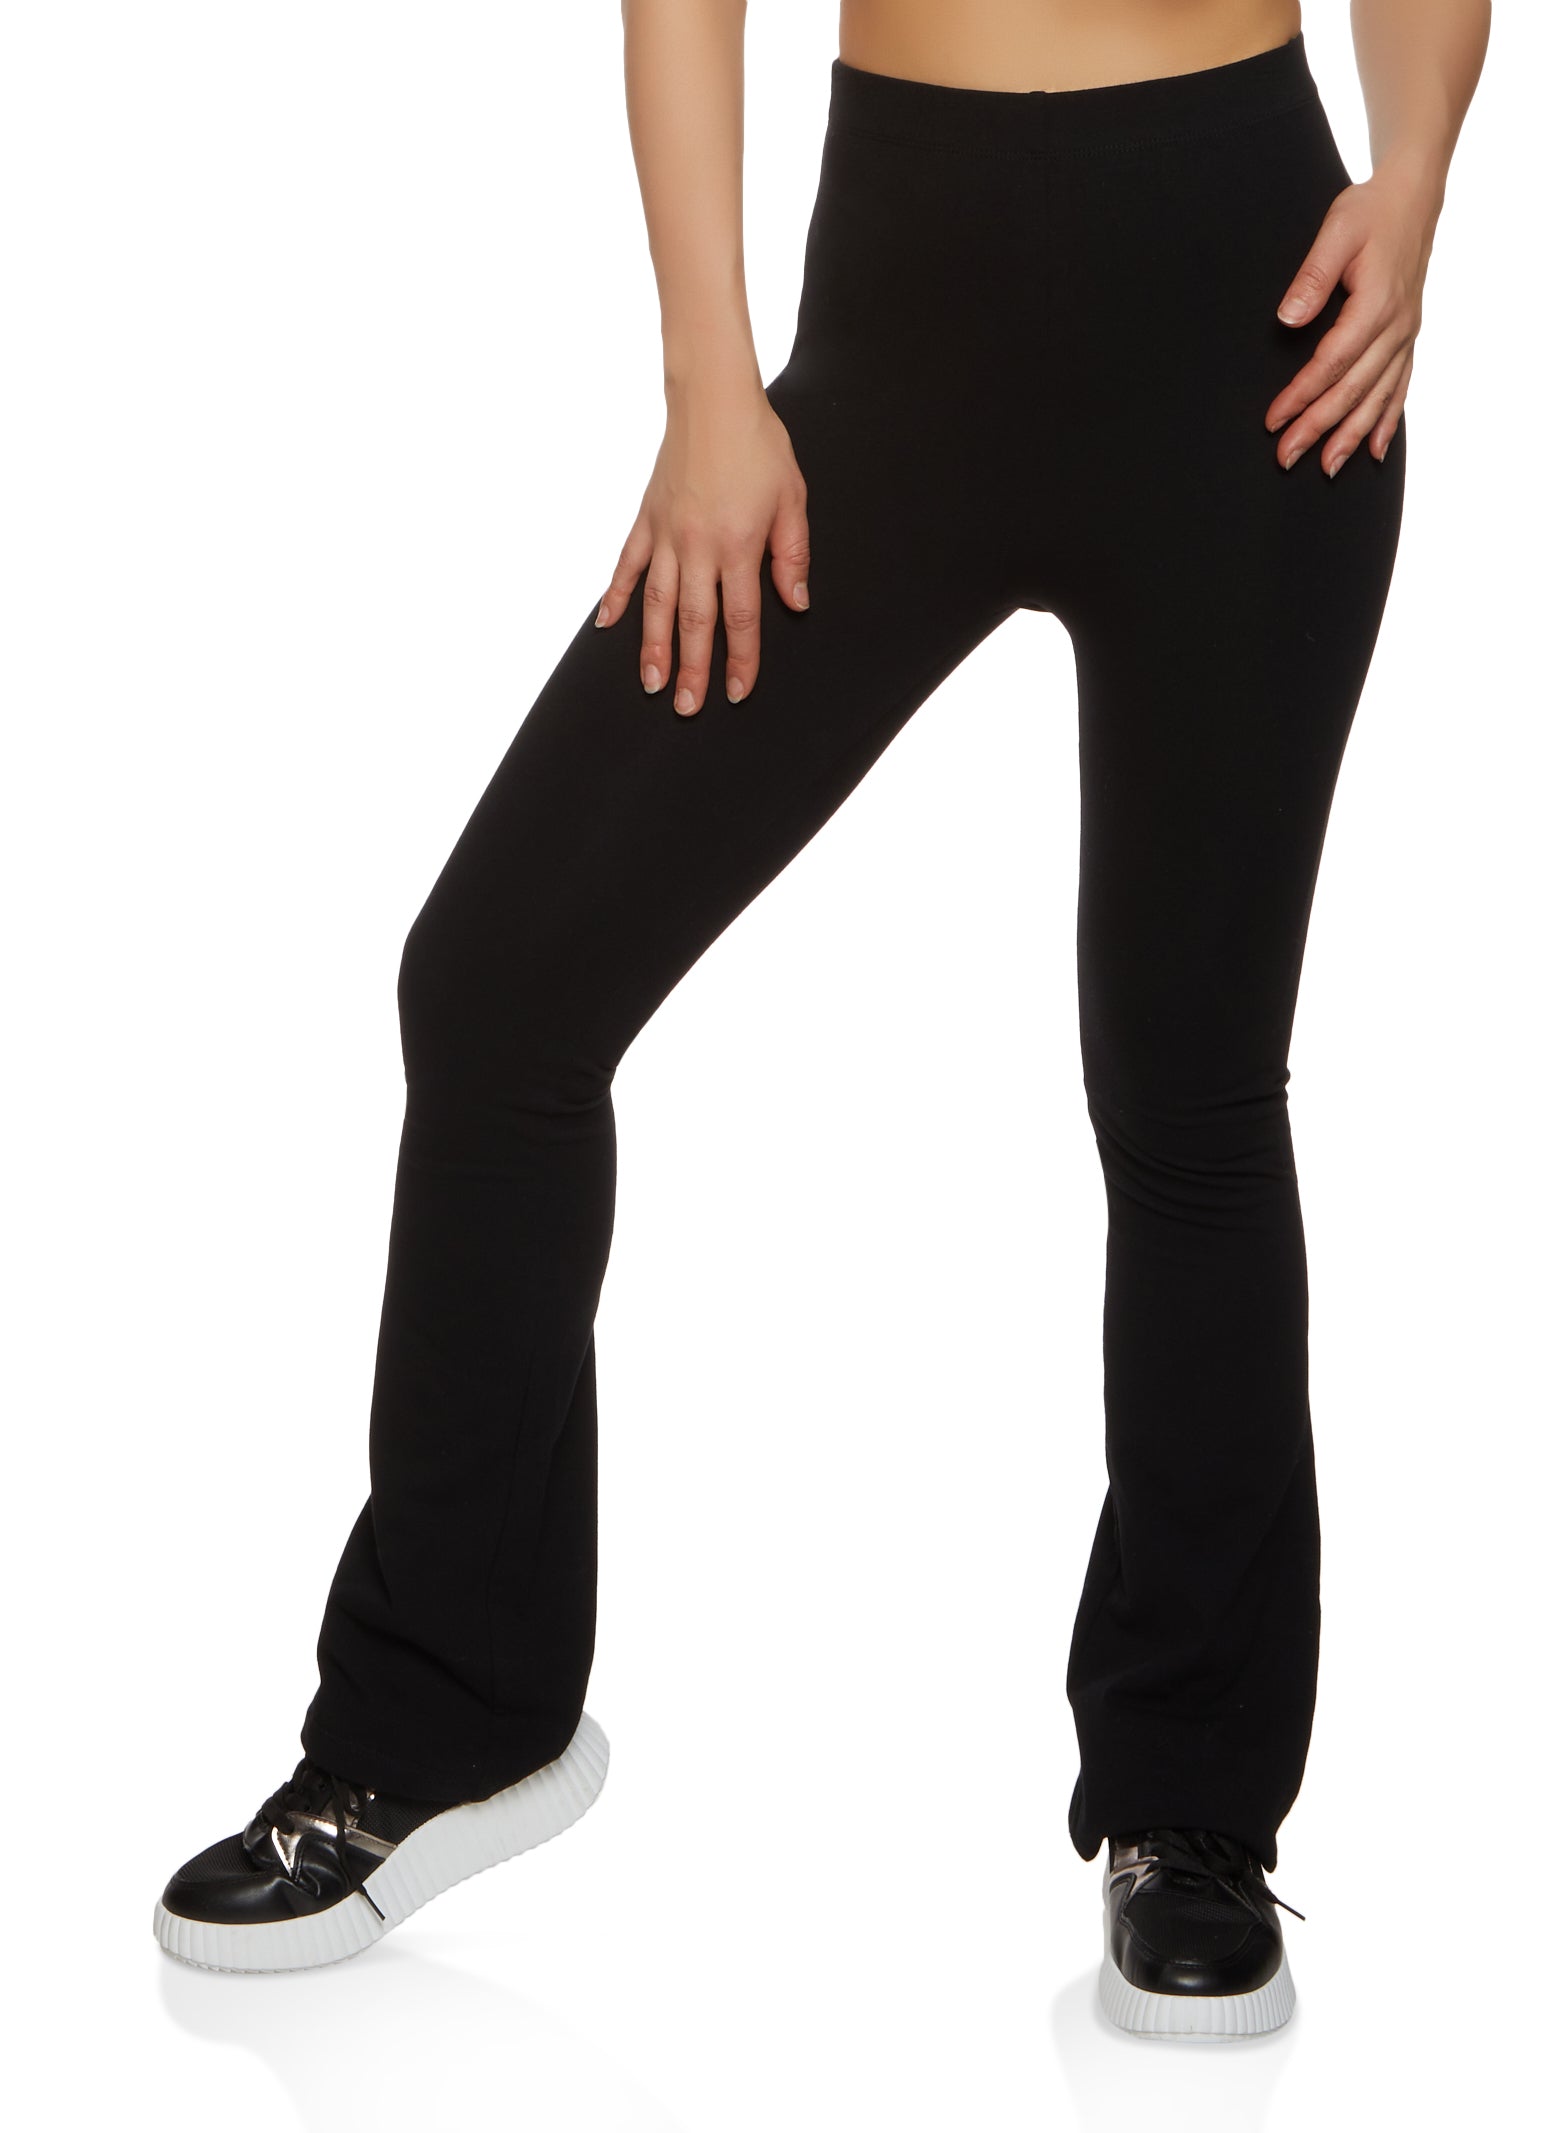 Womens Activewear and Loungewear, Everyday Low Prices